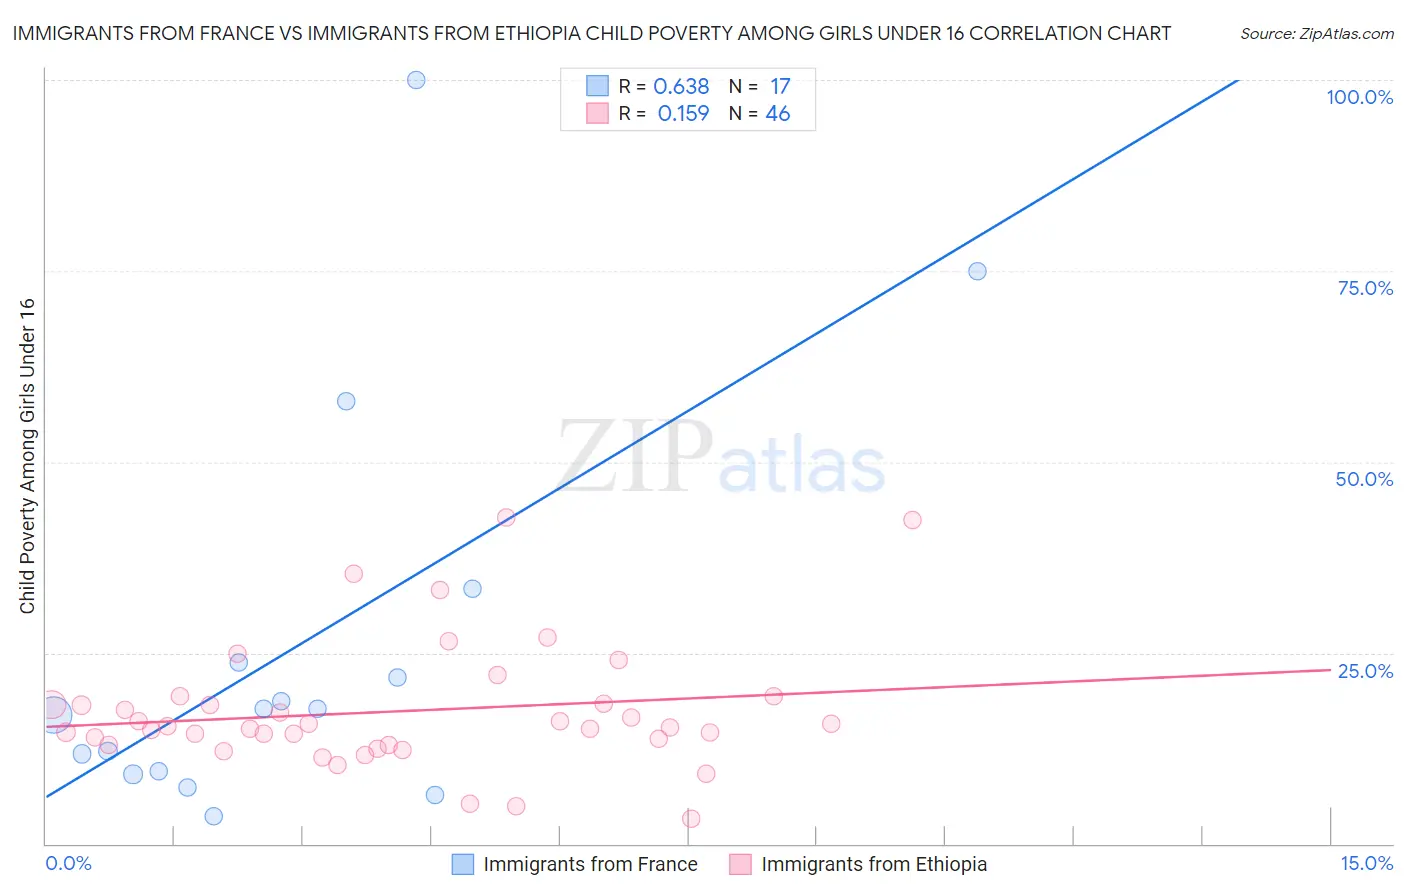 Immigrants from France vs Immigrants from Ethiopia Child Poverty Among Girls Under 16